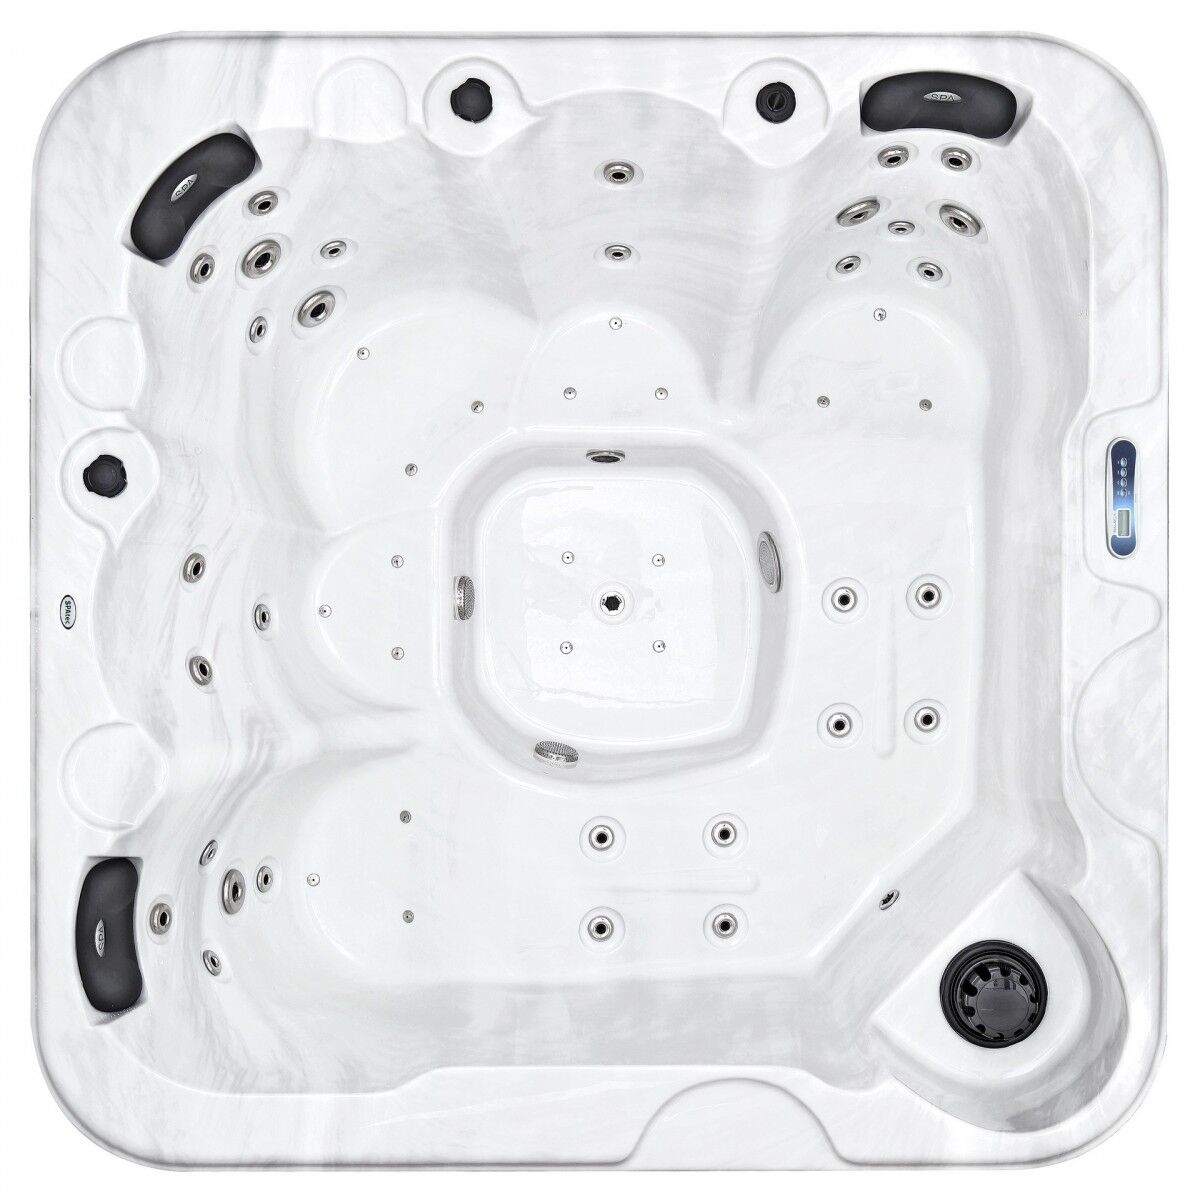 Spatec Jacuzzi Outdoor Whirlpools - SPAtec 700B weiss